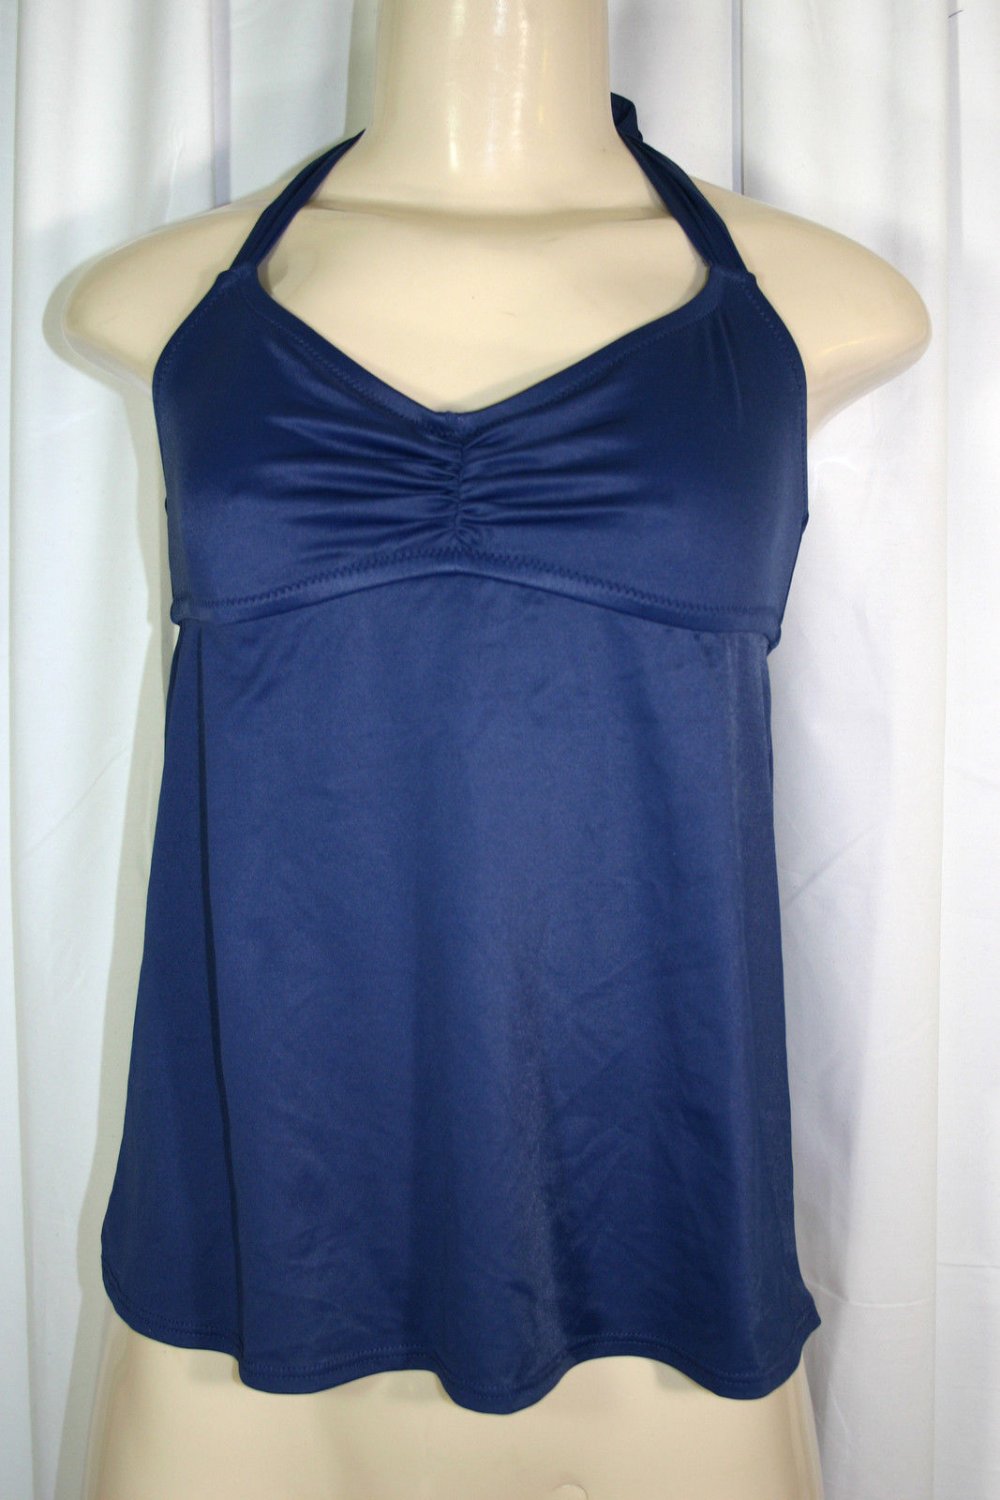 J CREW Solid Navy Blue Halter Ruched Bust Tankini Swimsuit Top Size Small